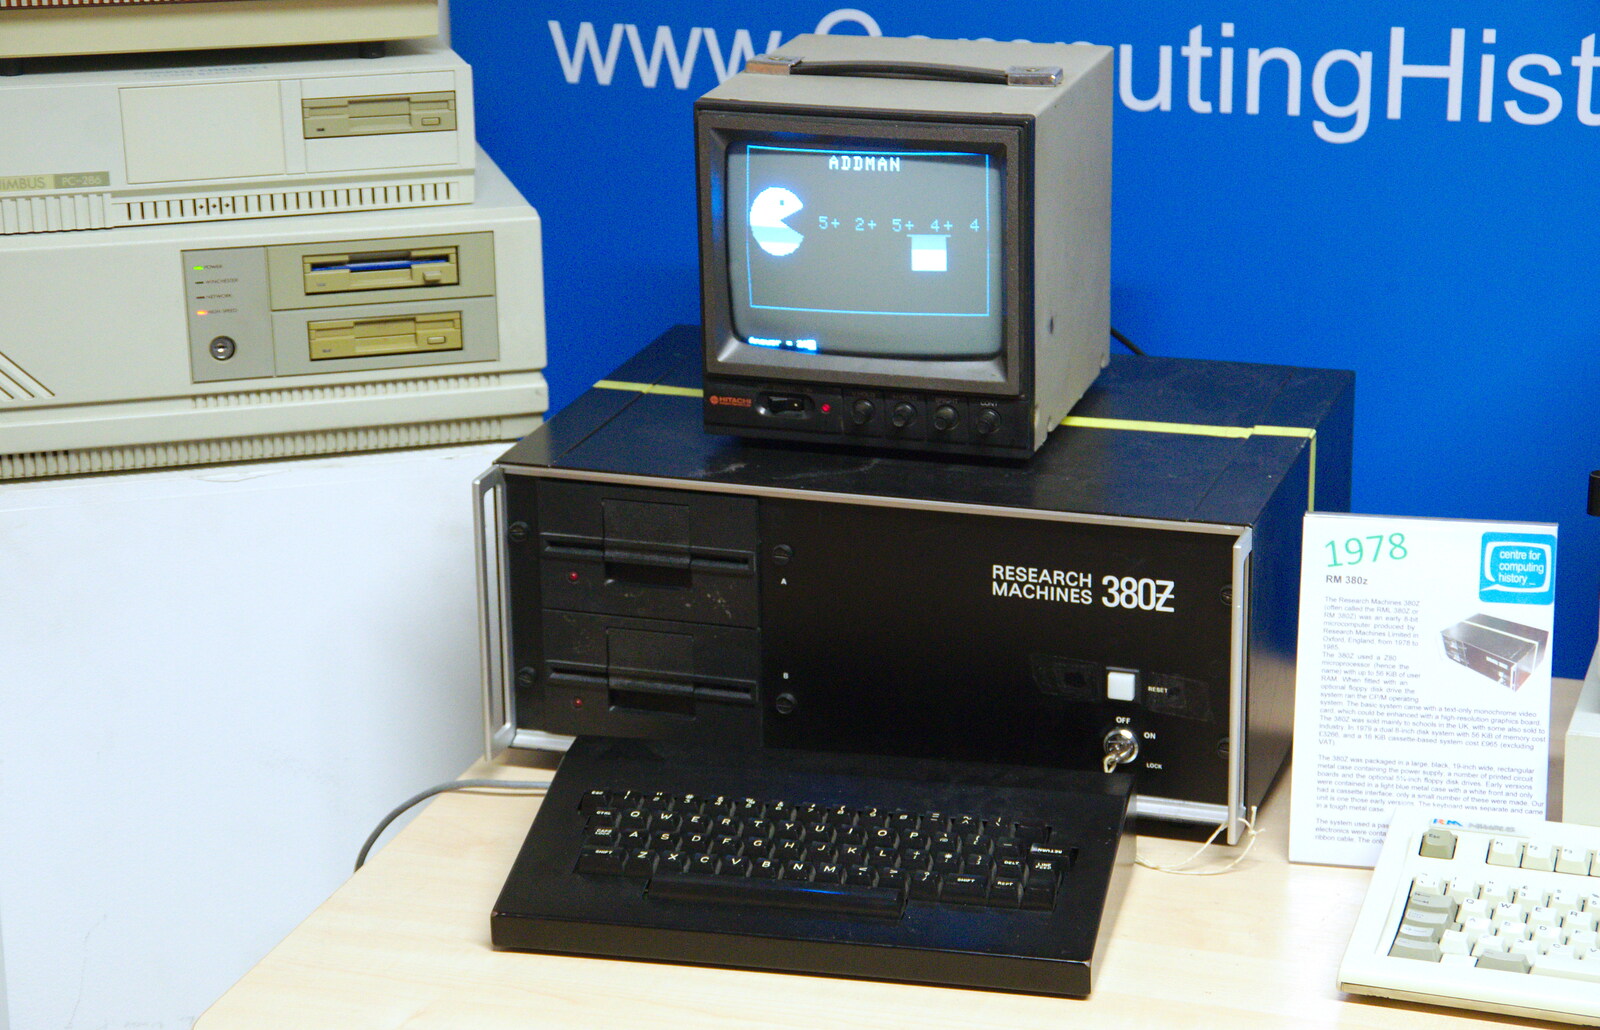 An RM 380Z from The Retro Computer Festival, Centre For Computing History, Cambridge - 15th September 2018